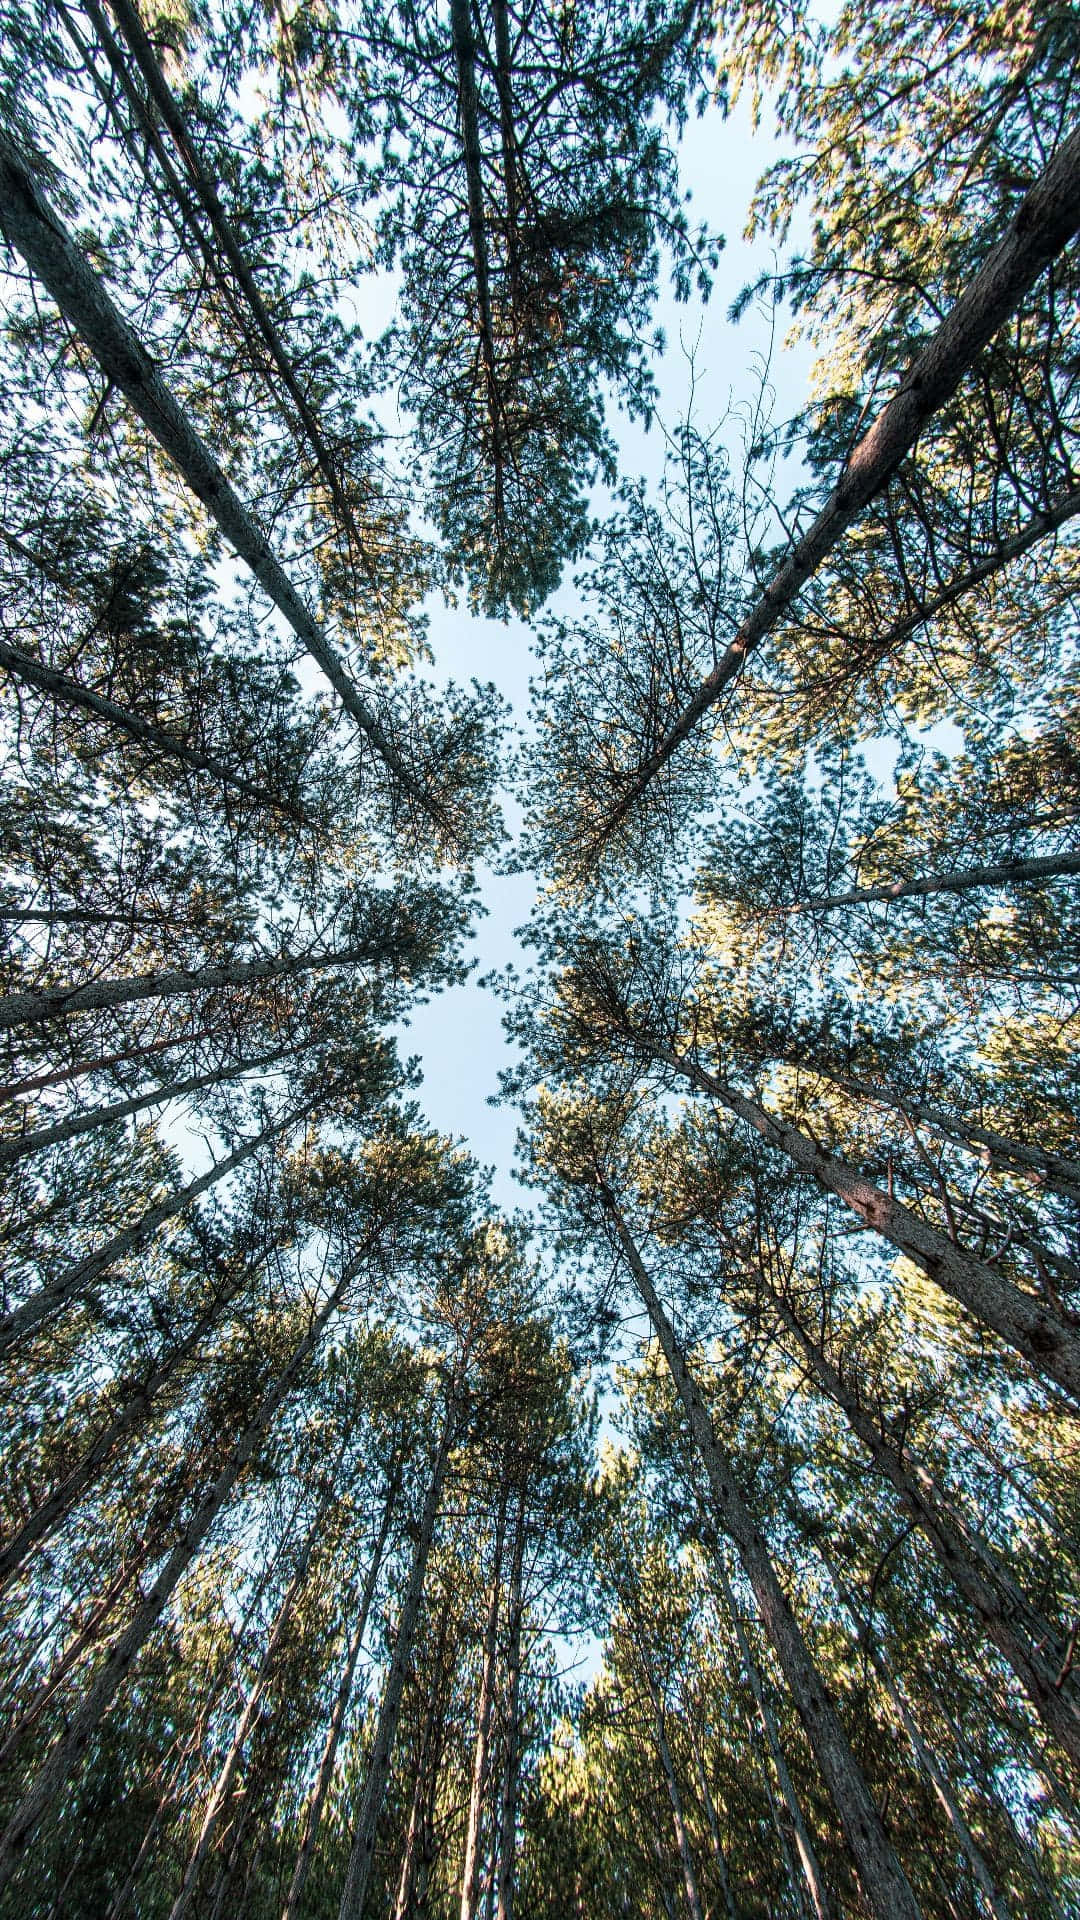 Enjoy the beauty of a forest on your iPhone Wallpaper